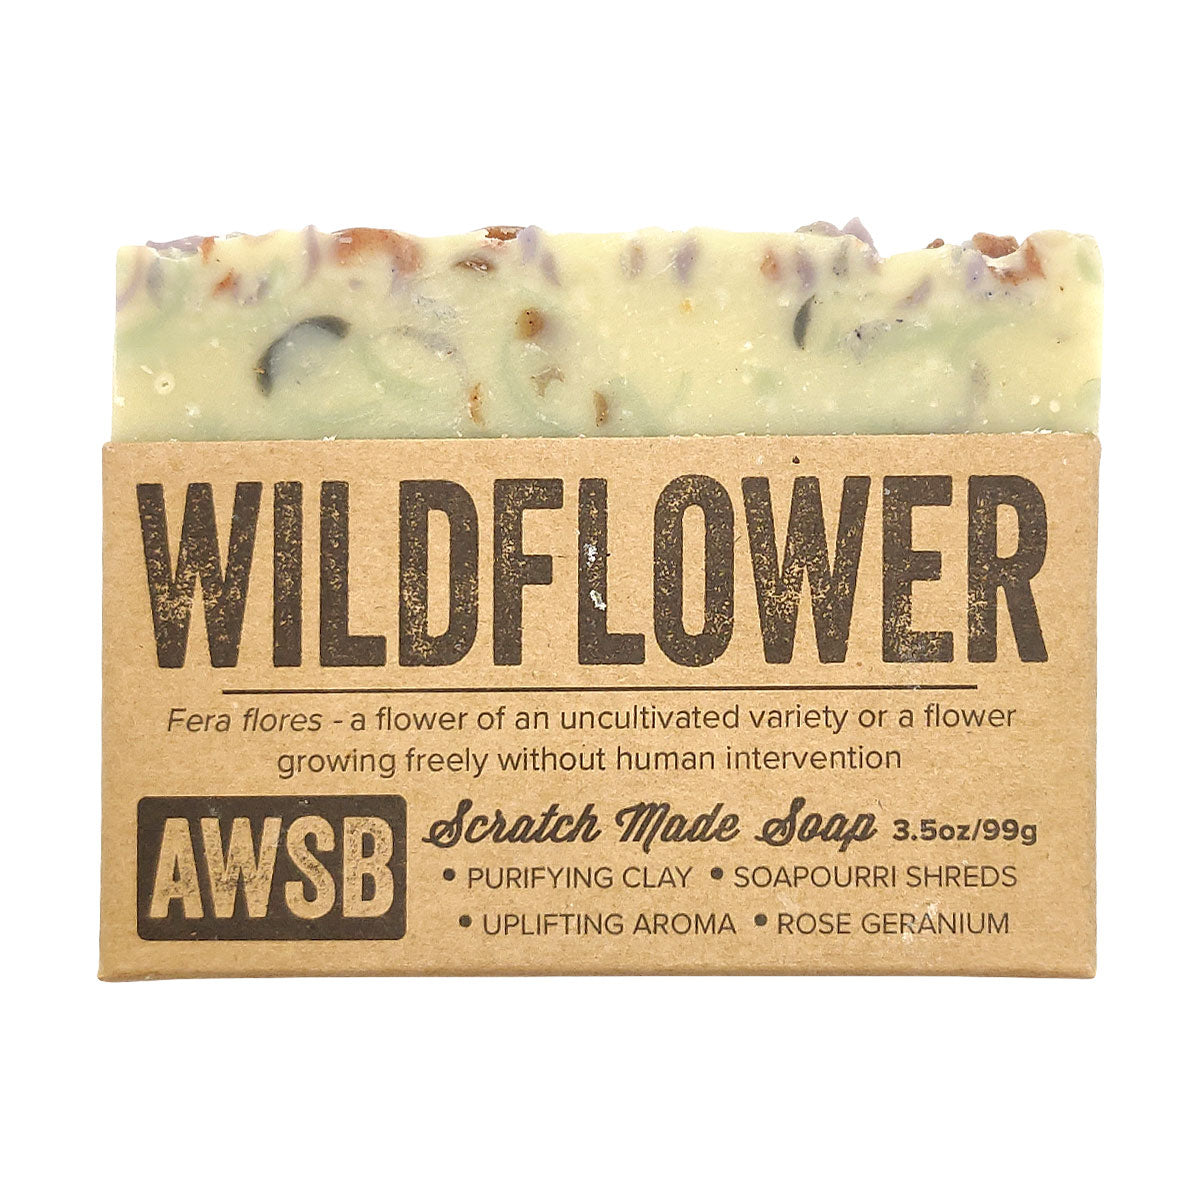 Organic WildFlower Soap for sale, Bridal Shower Favor, Sustainable Skincare, Natural Gift, Vegan Cruelty Free, Face And Body, Bath Beauty, Essential Oil Soap, Botanical Soap